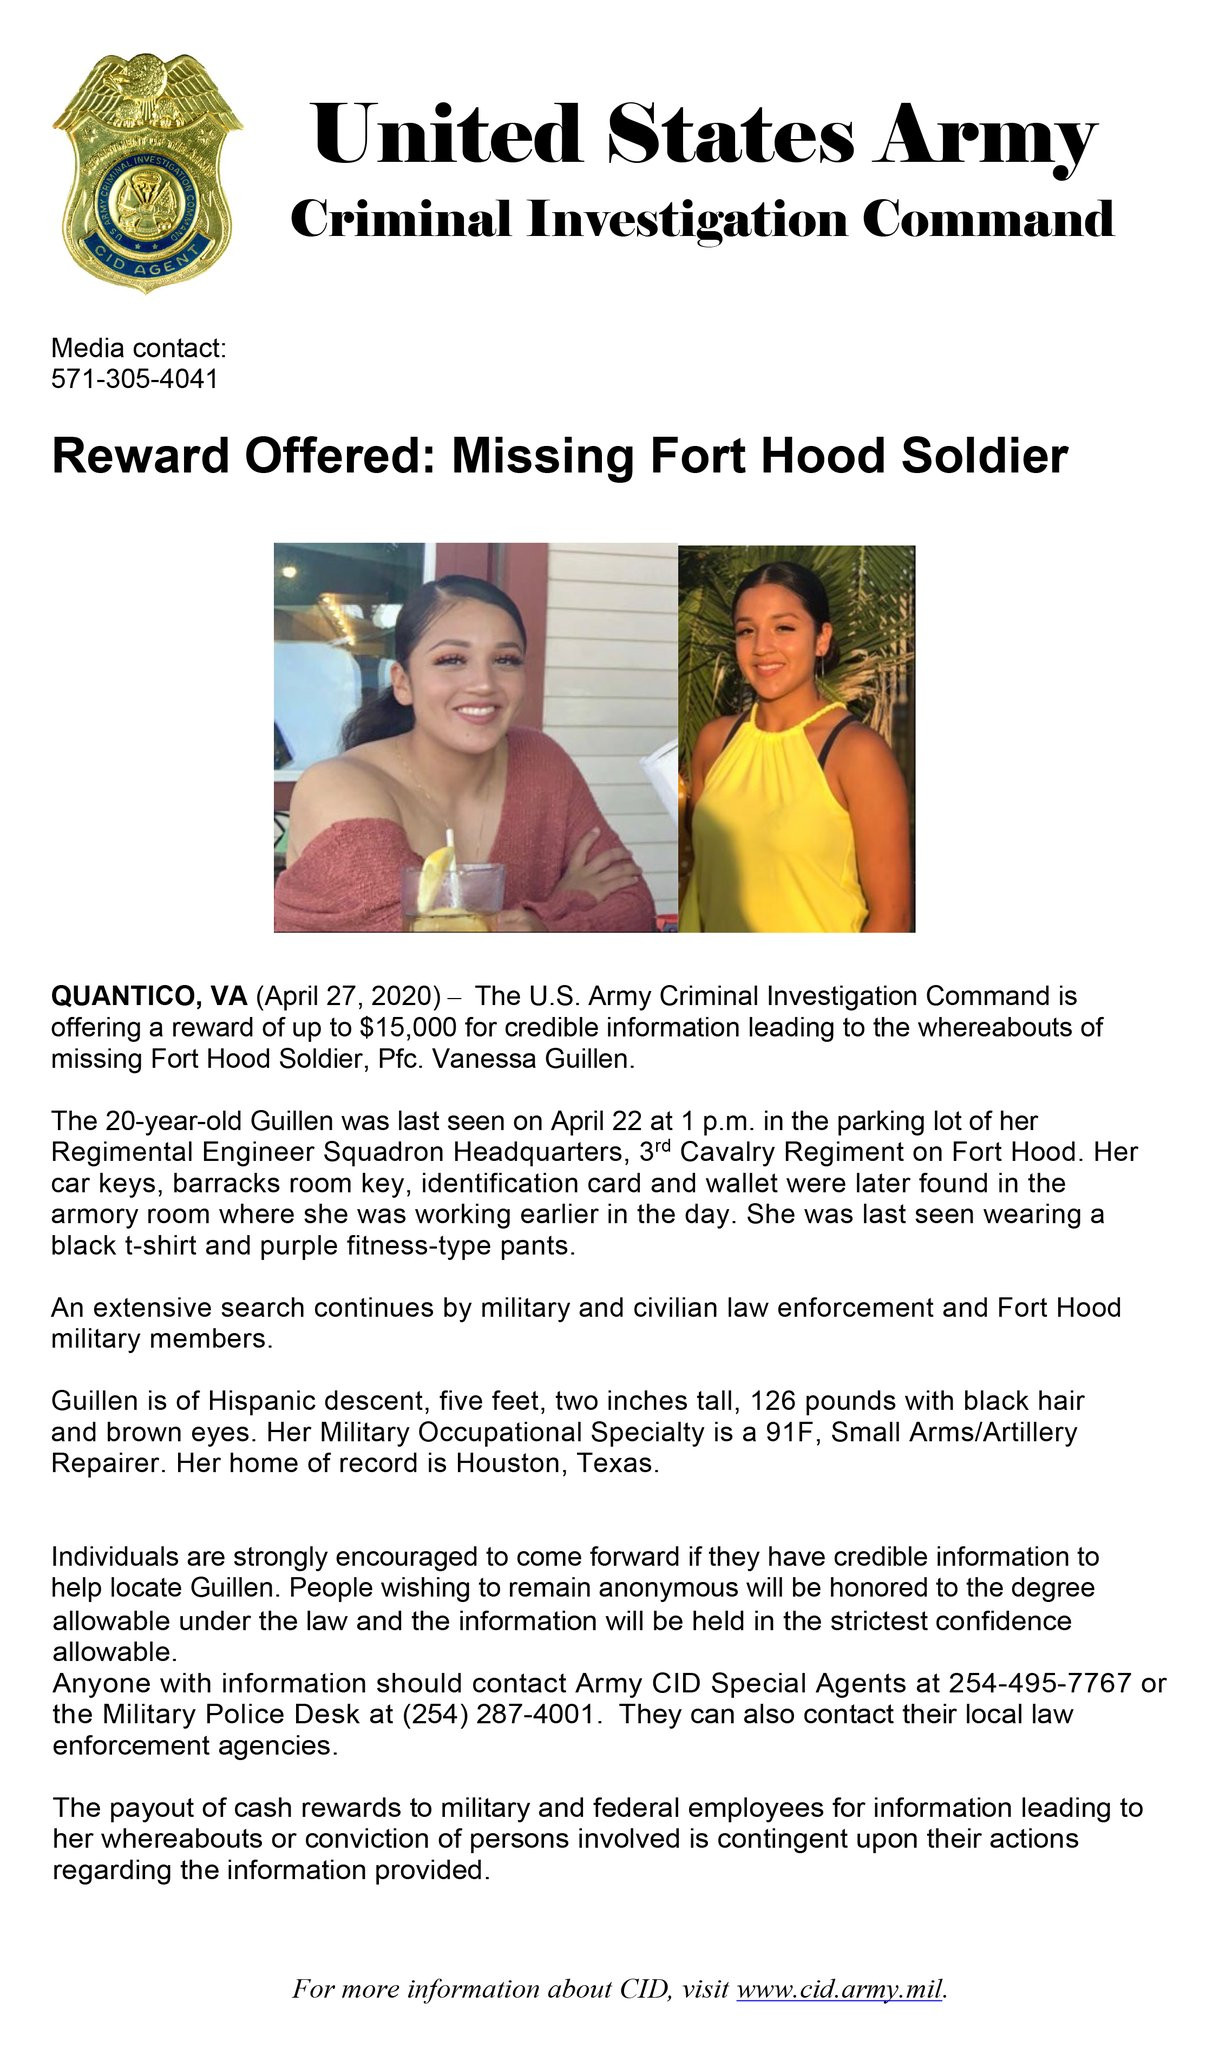 Photo of the missing soldier